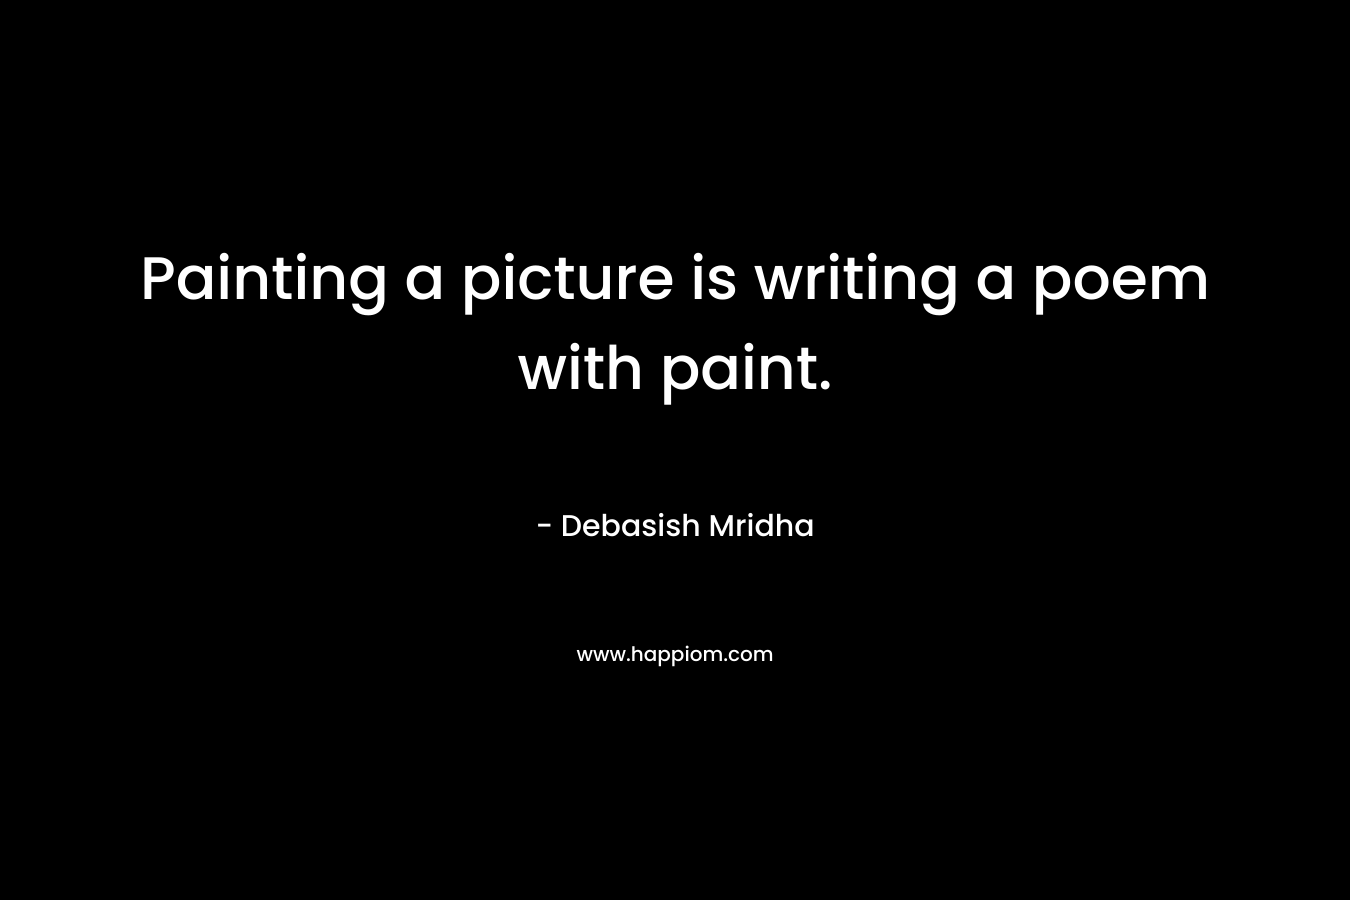 Painting a picture is writing a poem with paint. – Debasish Mridha